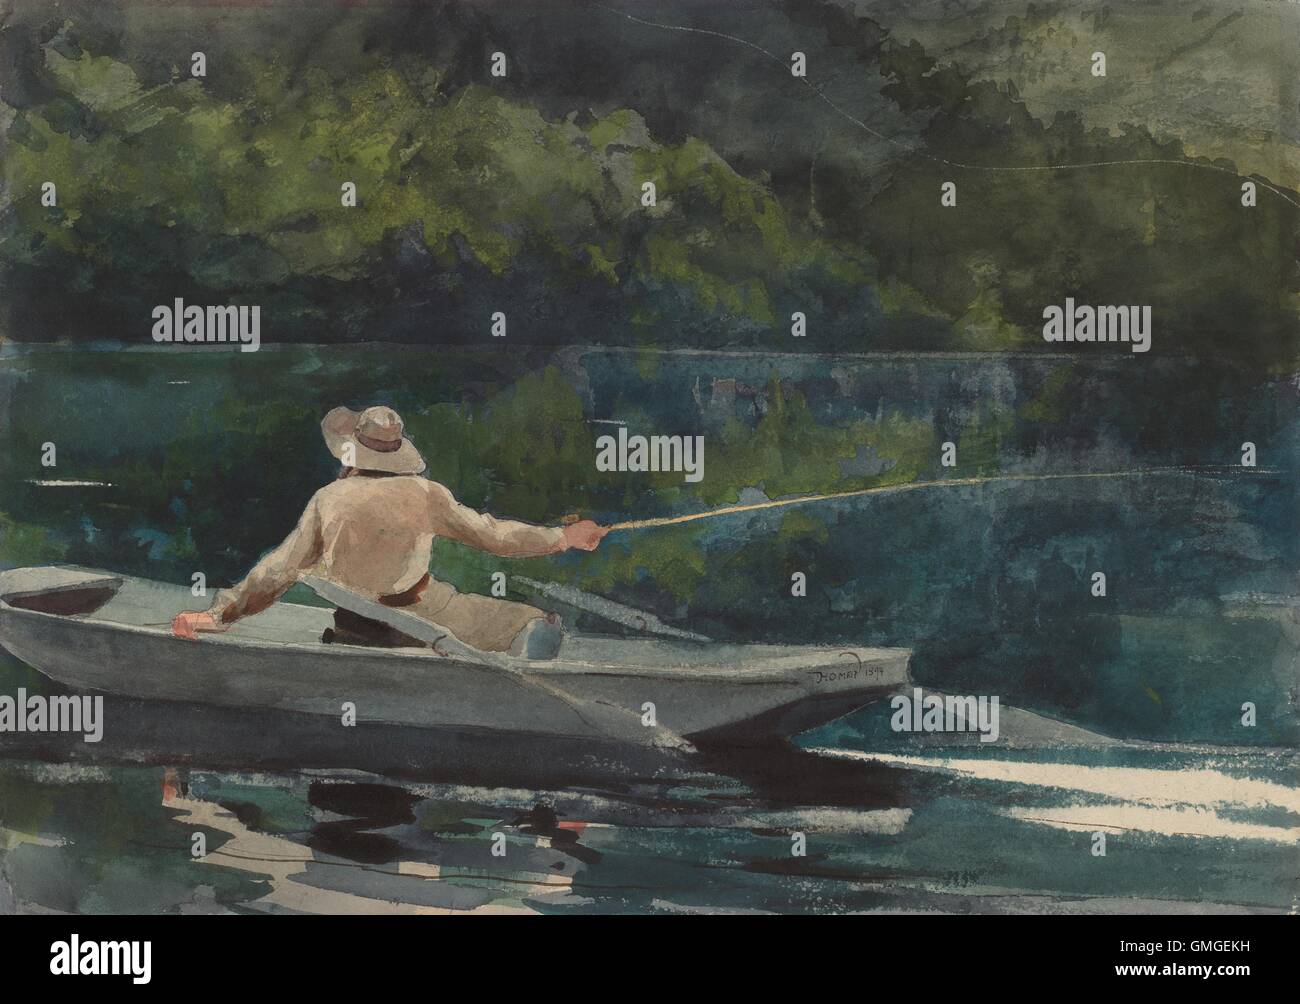 Casting, Number Two, by Winslow Homer, 1894, American painting, watercolor on paper. Homer's serene scene is still except for the whipped fishing line and reflections of boat's wake (BSLOC 2016 6 195) Stock Photo